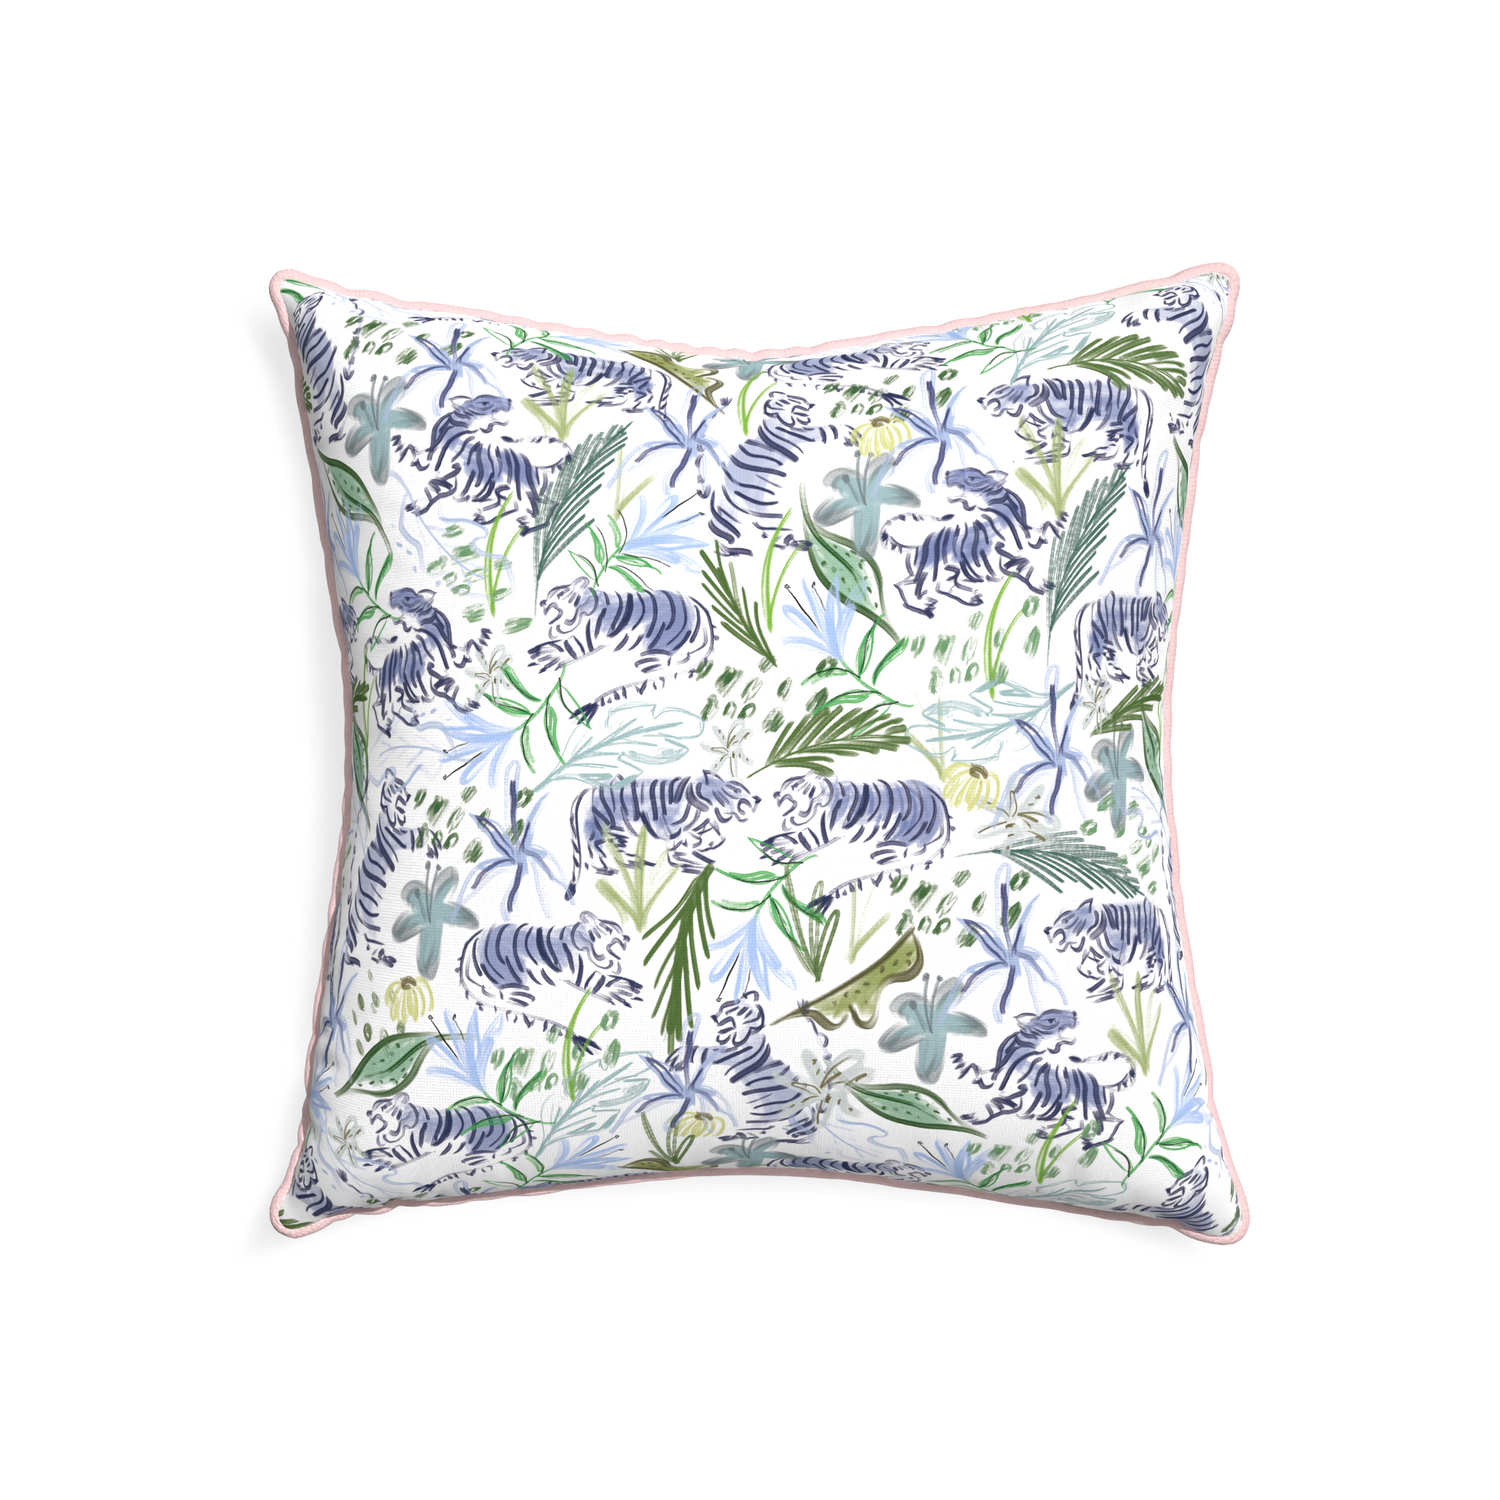 22-square frida green custom green tigerpillow with petal piping on white background